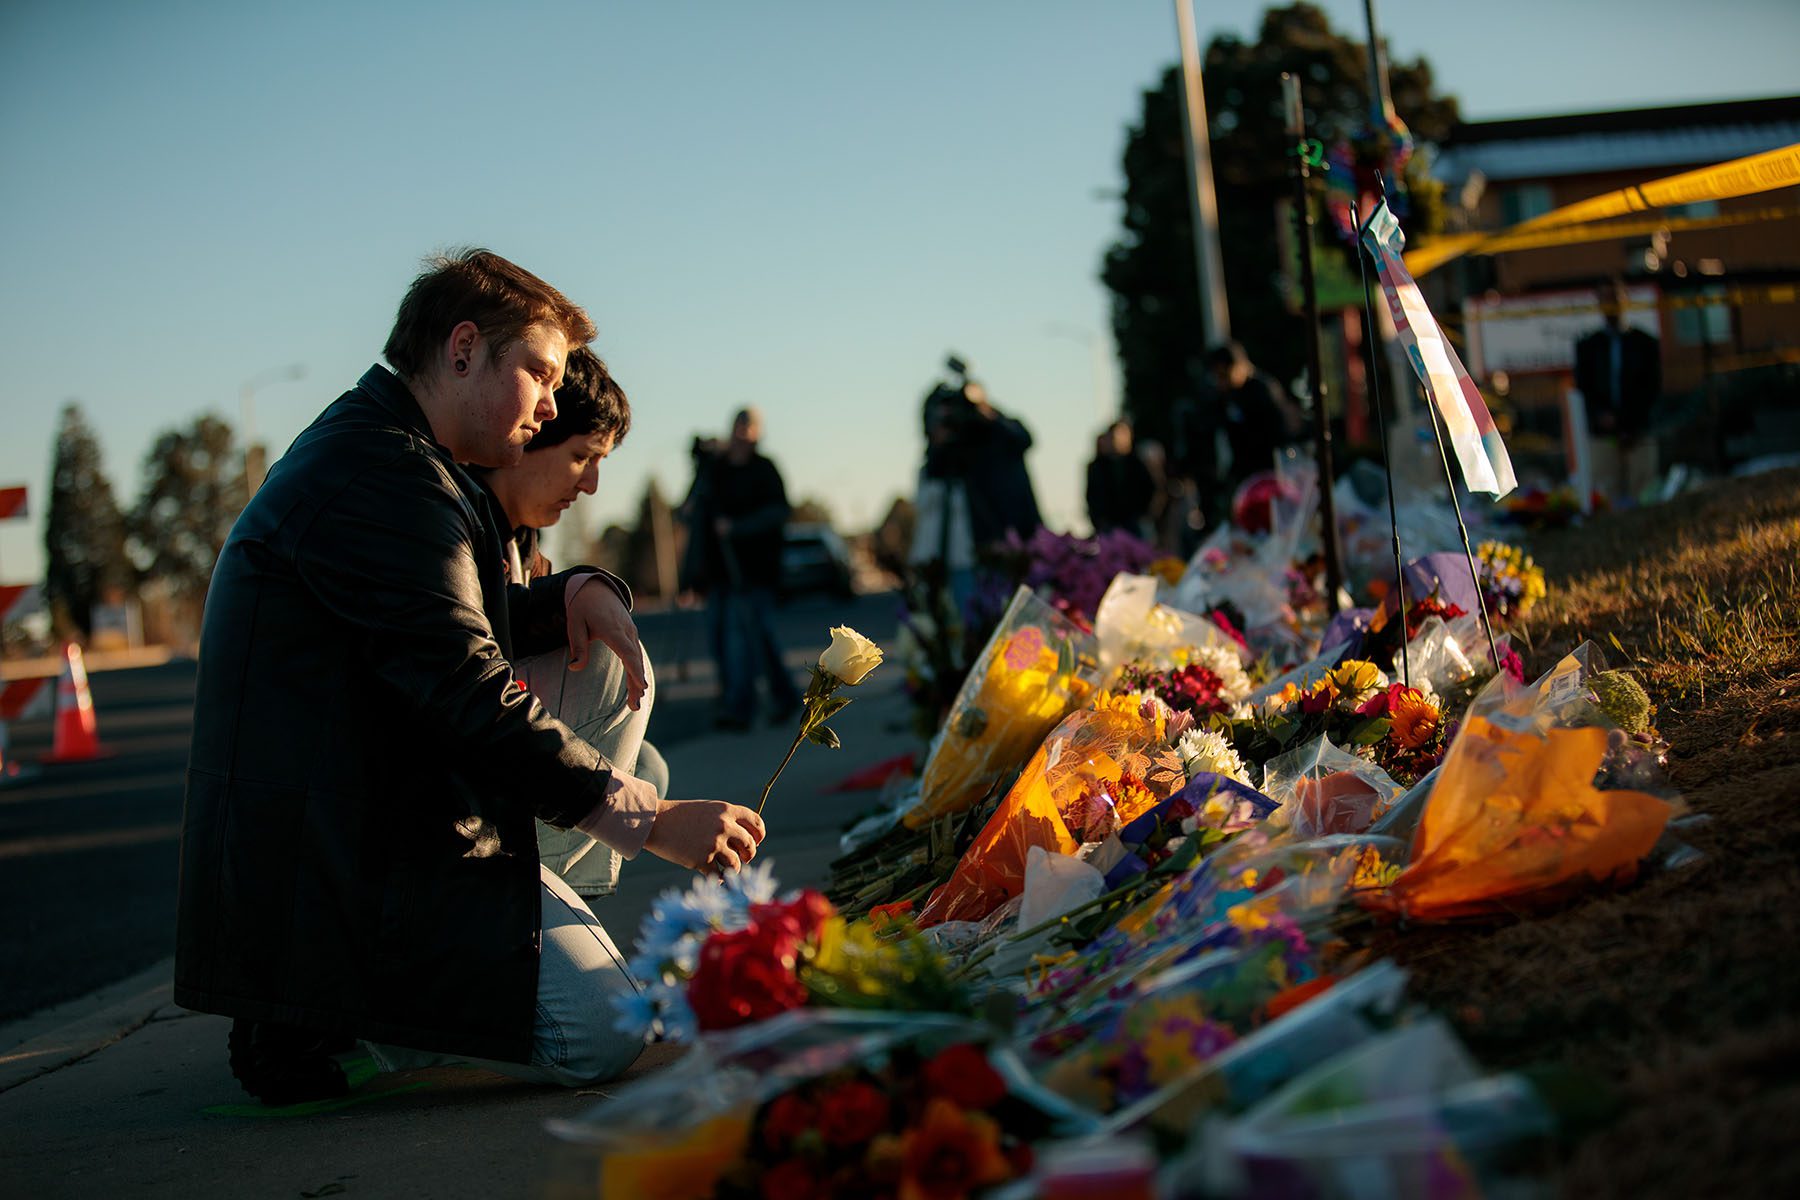 People leave flowers at a growing memorial. Flags and bouquets of flowers are scattered on the ground, police tape still visible in the background.